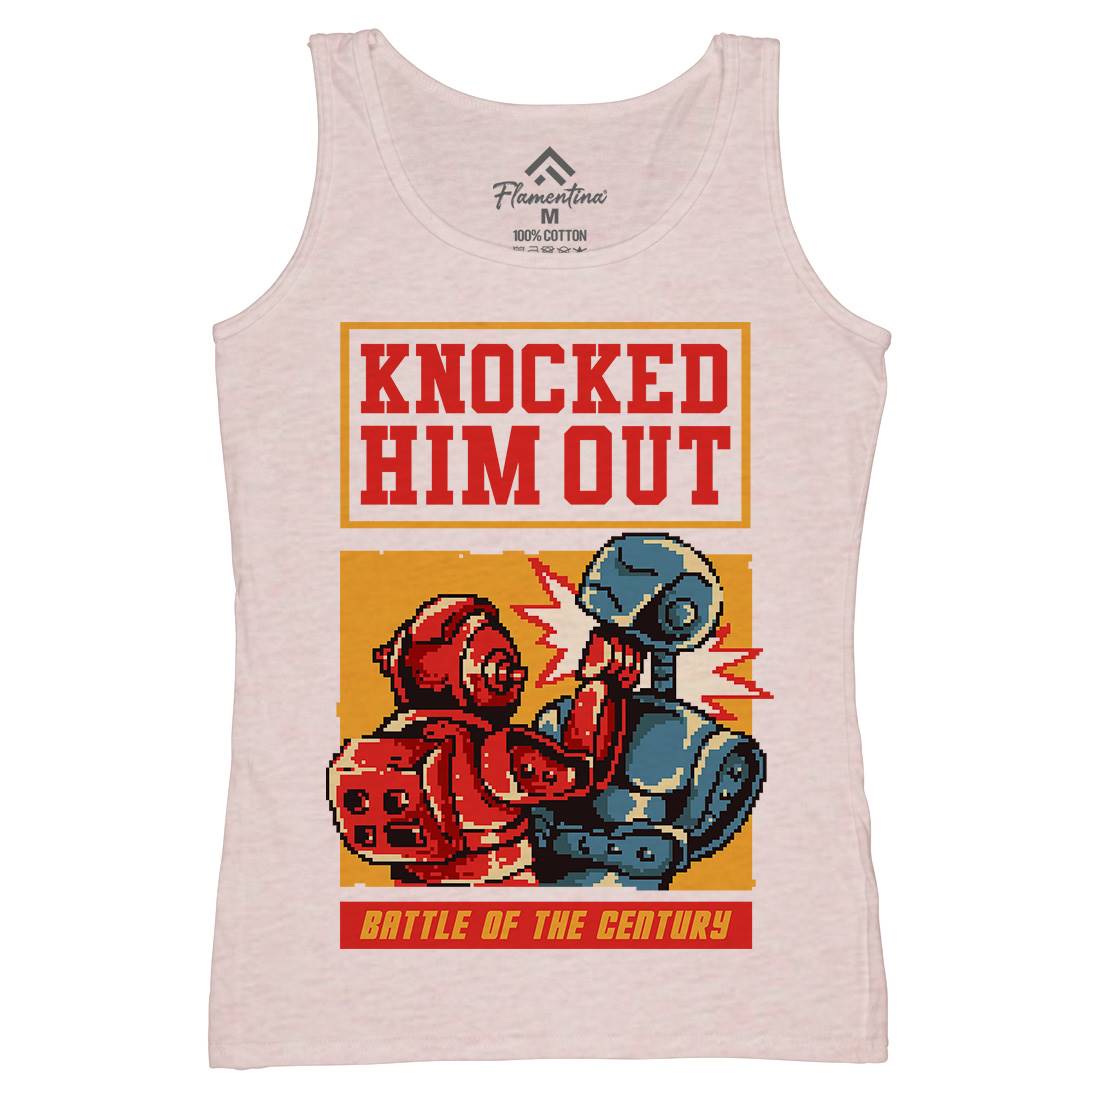 Knocked Him Out Womens Organic Tank Top Vest Space B923